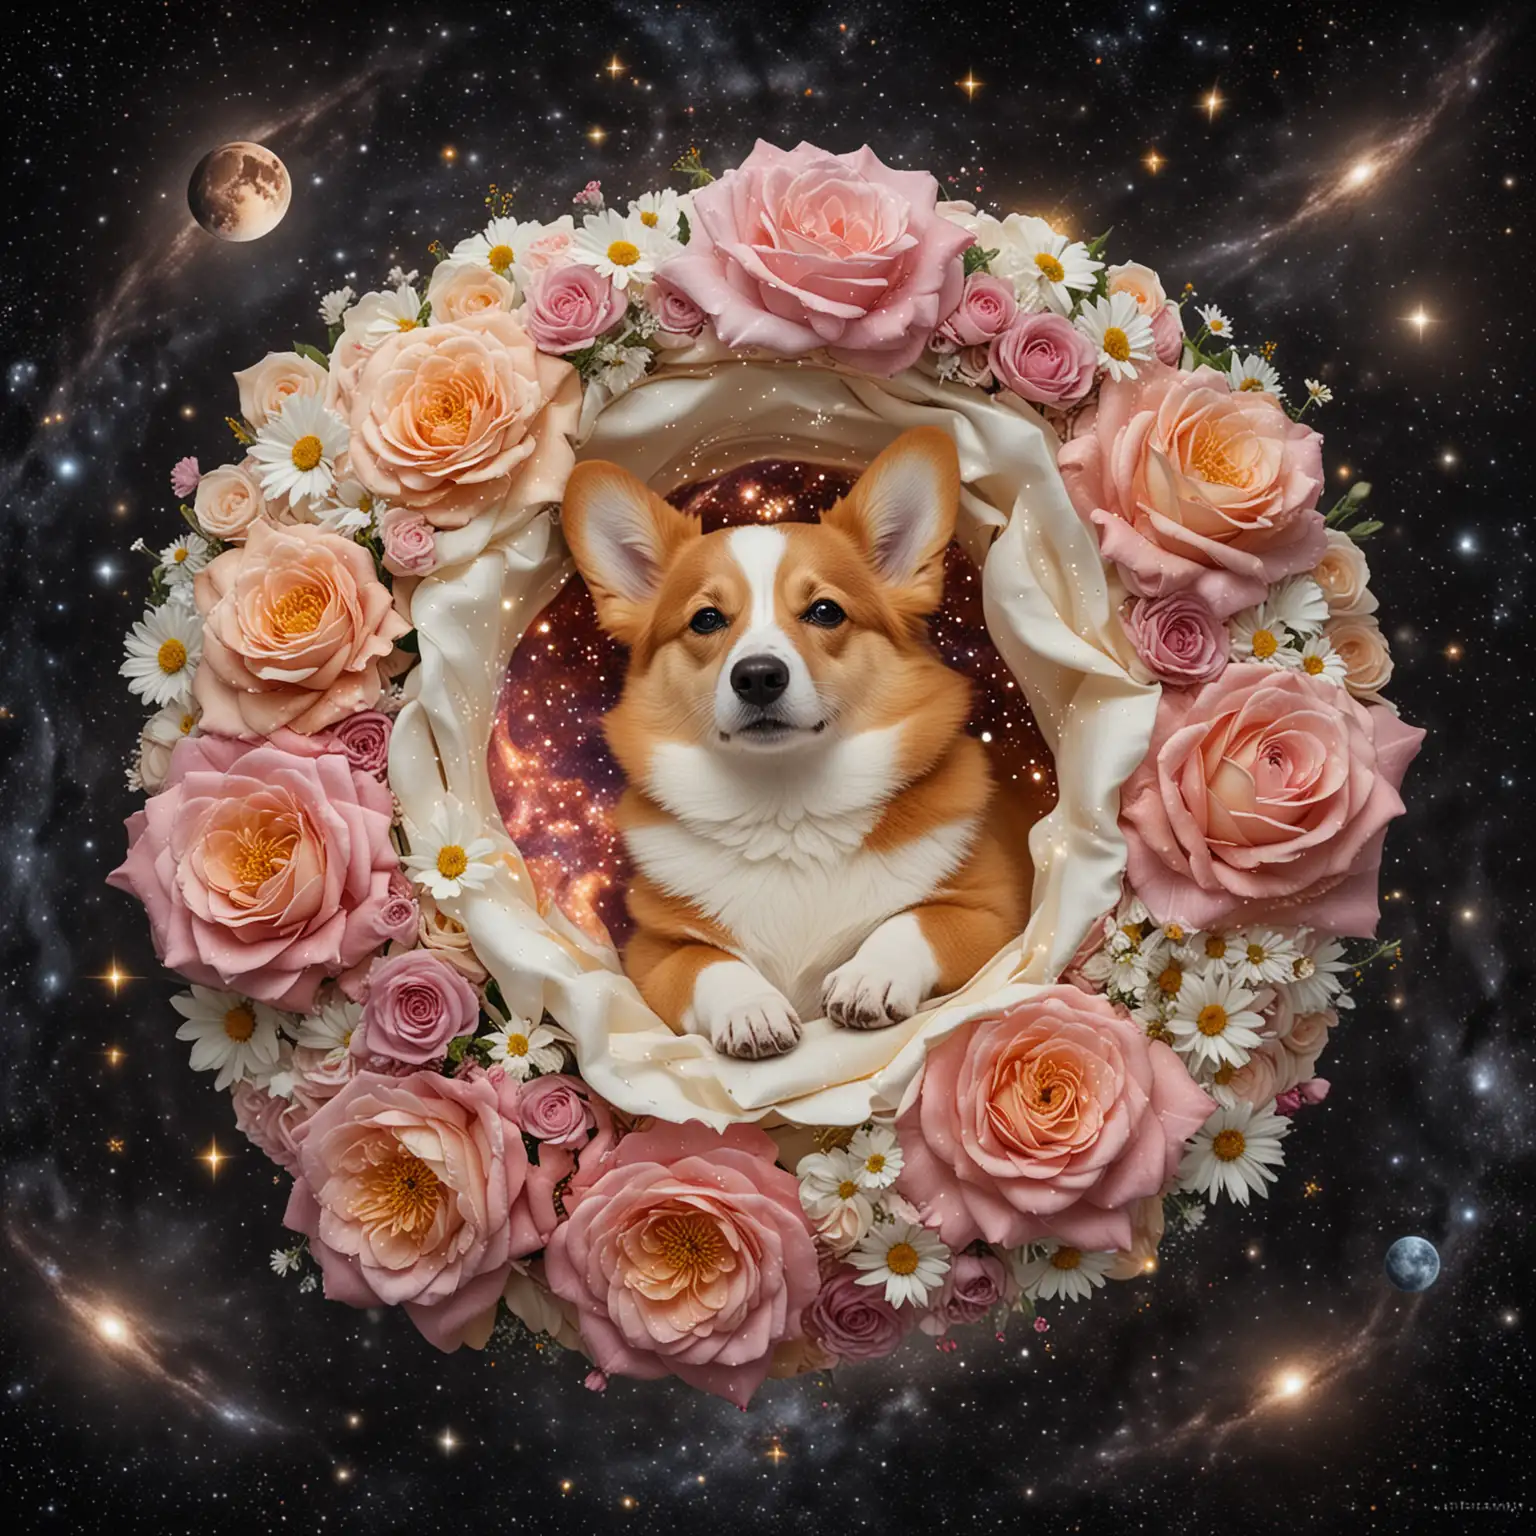 Cosmic Baby Corgi Sleeping in Giant Flower amidst Ringed Planets and Constellations